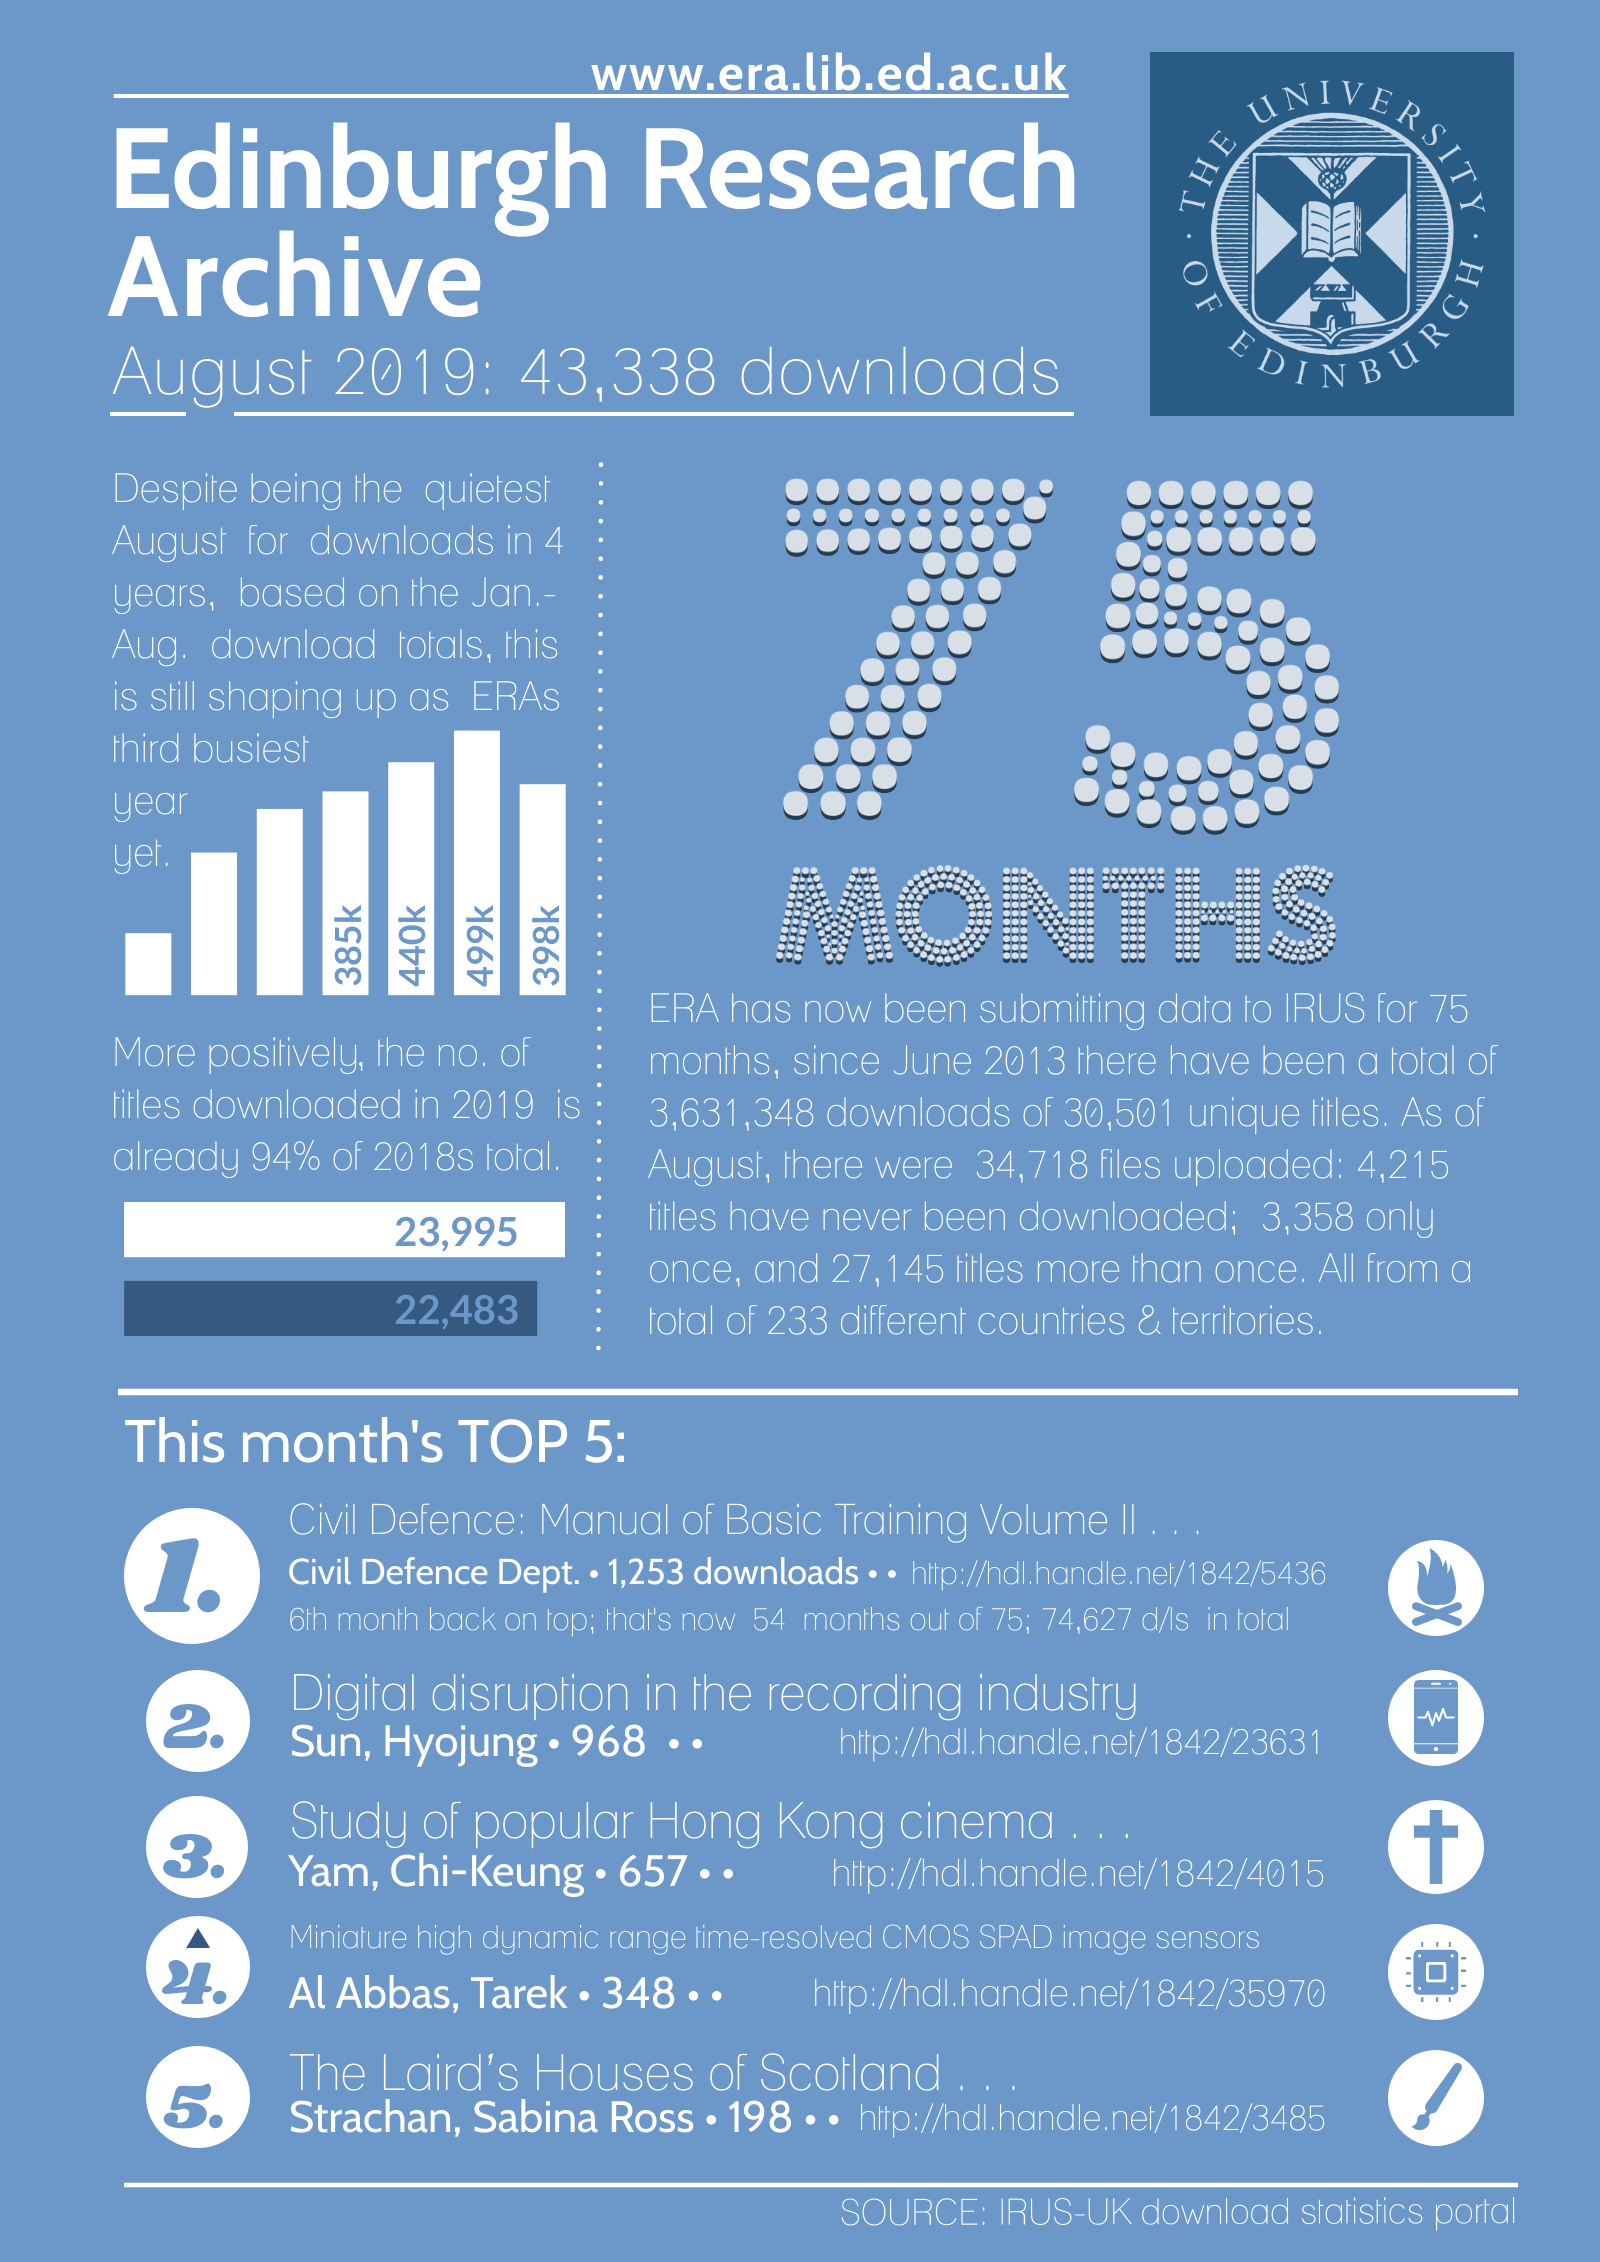 Edinburgh Research Archive: August 2019 downloads infographic